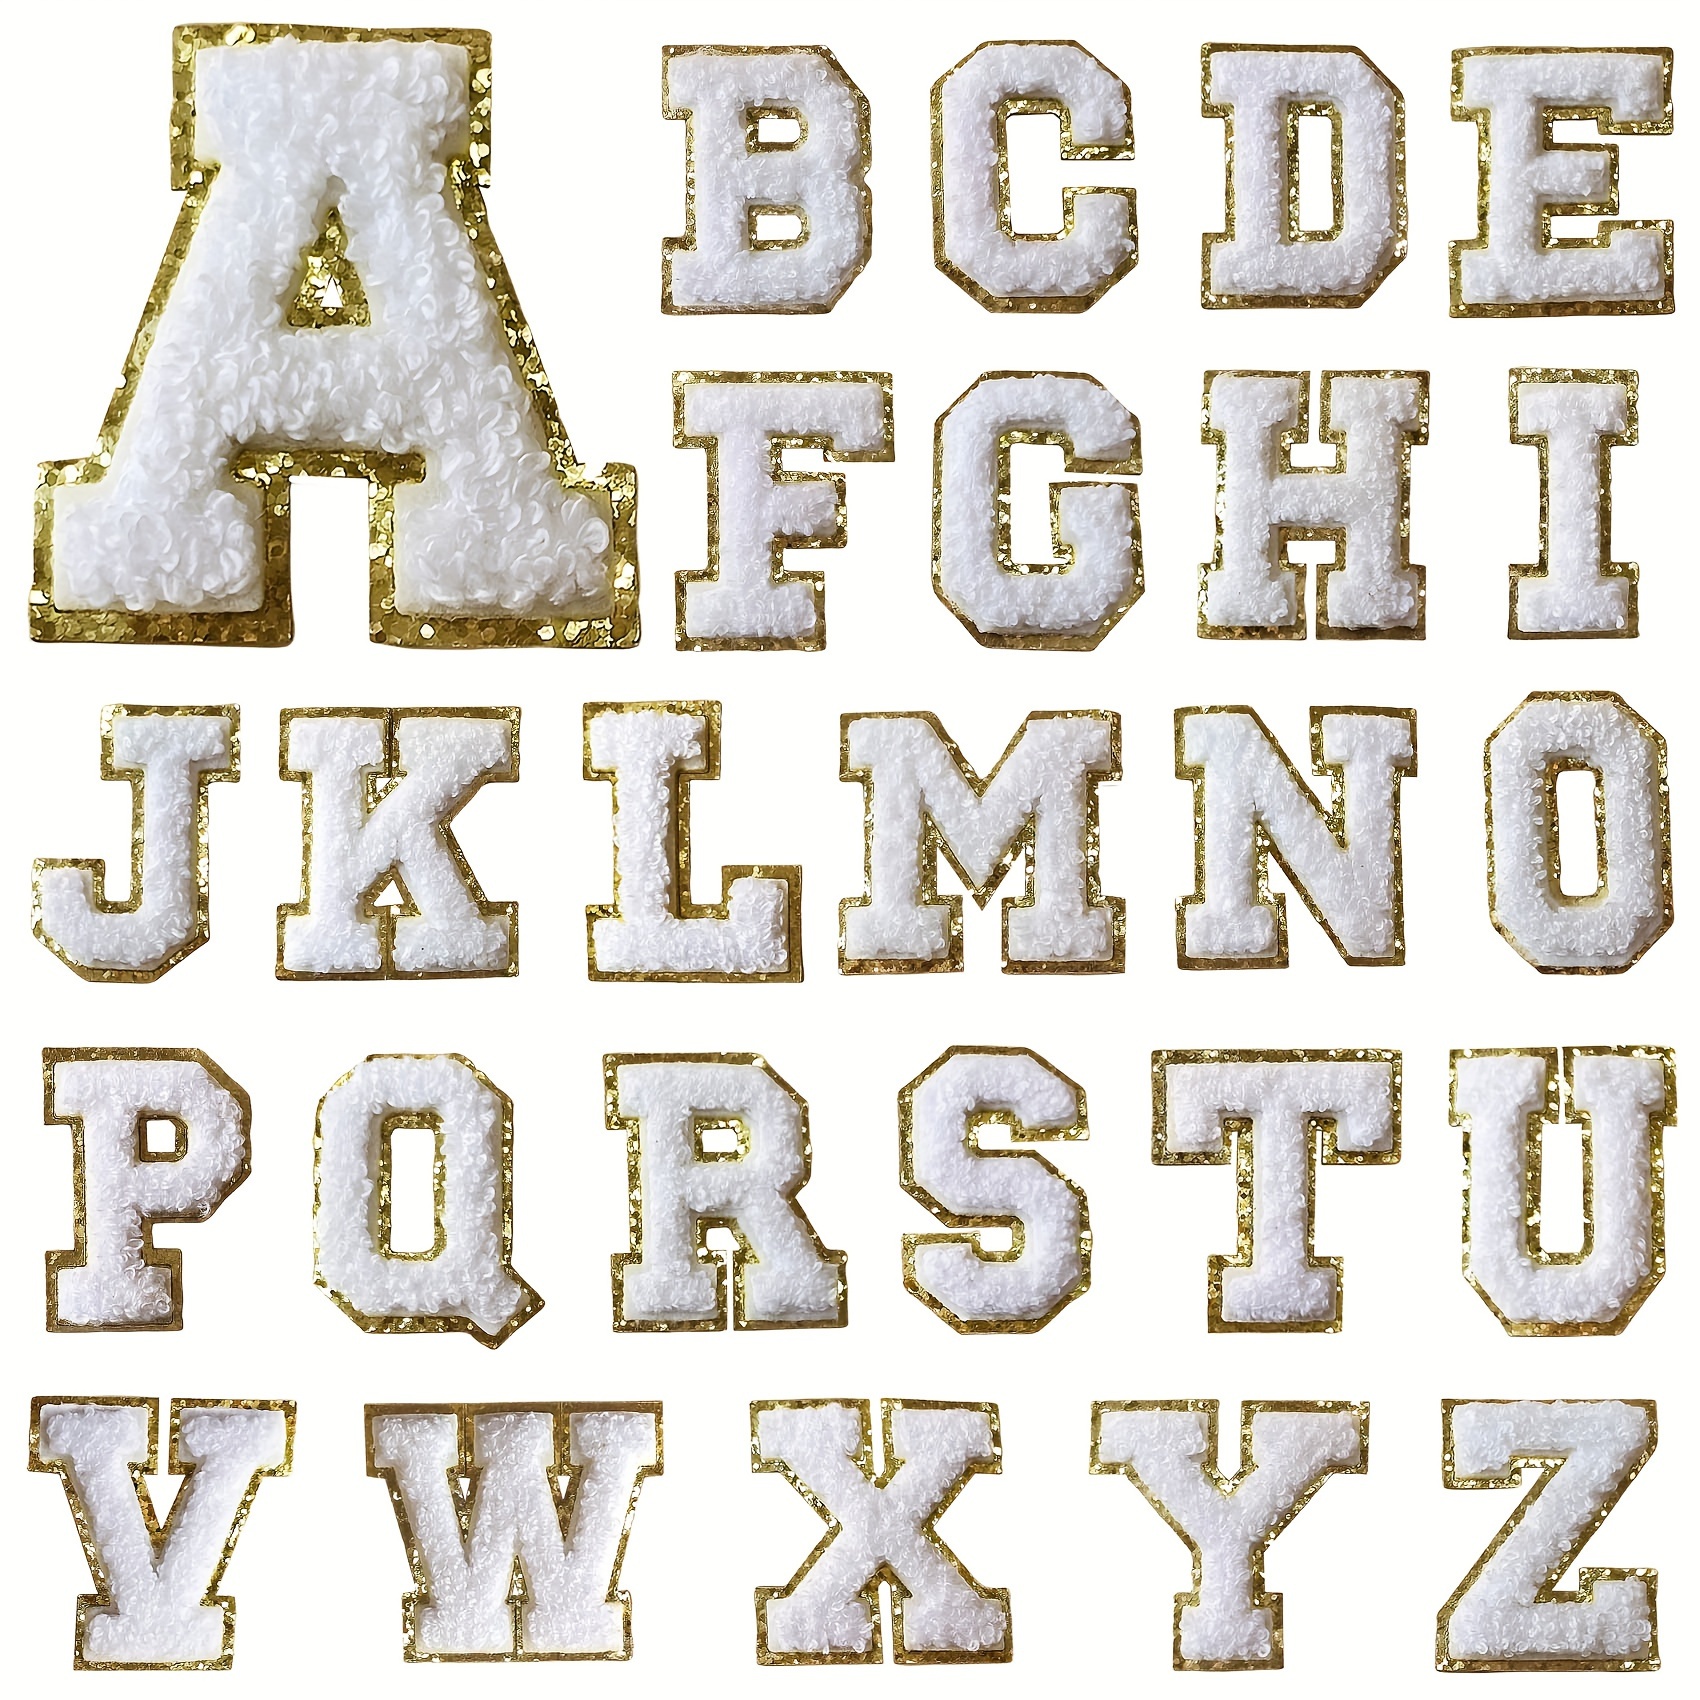 Best Deal for Self-Adhesive Embroidered Gold Glitter Letter Patches Iron